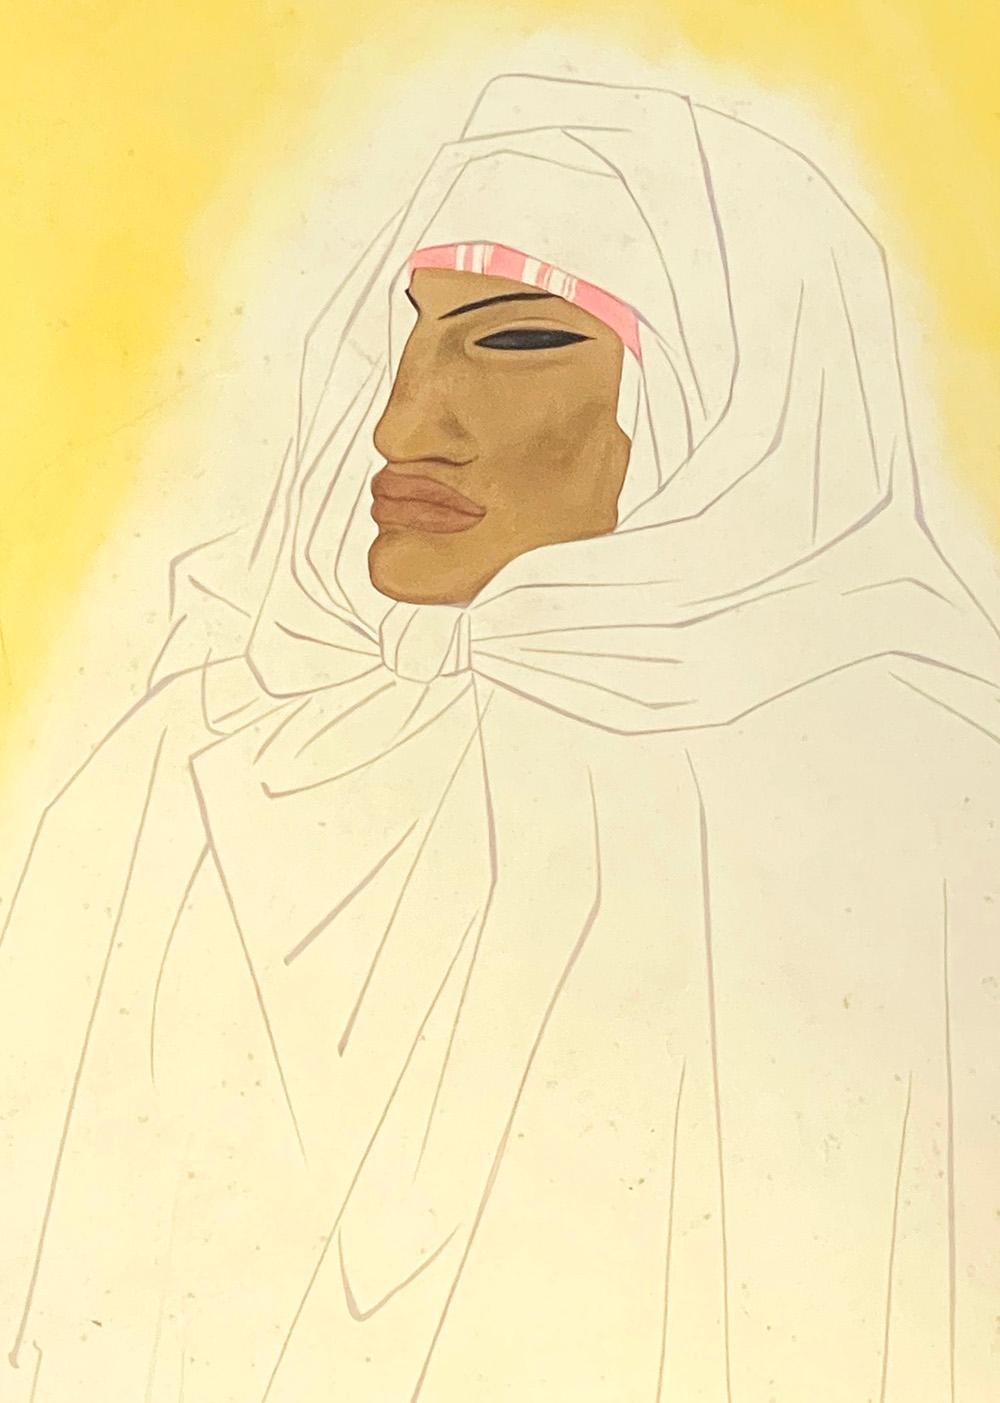 Striking and handsome, this depiction of a Bedouin in his traditional robe has the color and intensity one would associate with the fierce sun and heat of North Africa. The painting was executed by Henry Stahlhut, who is best known today for the